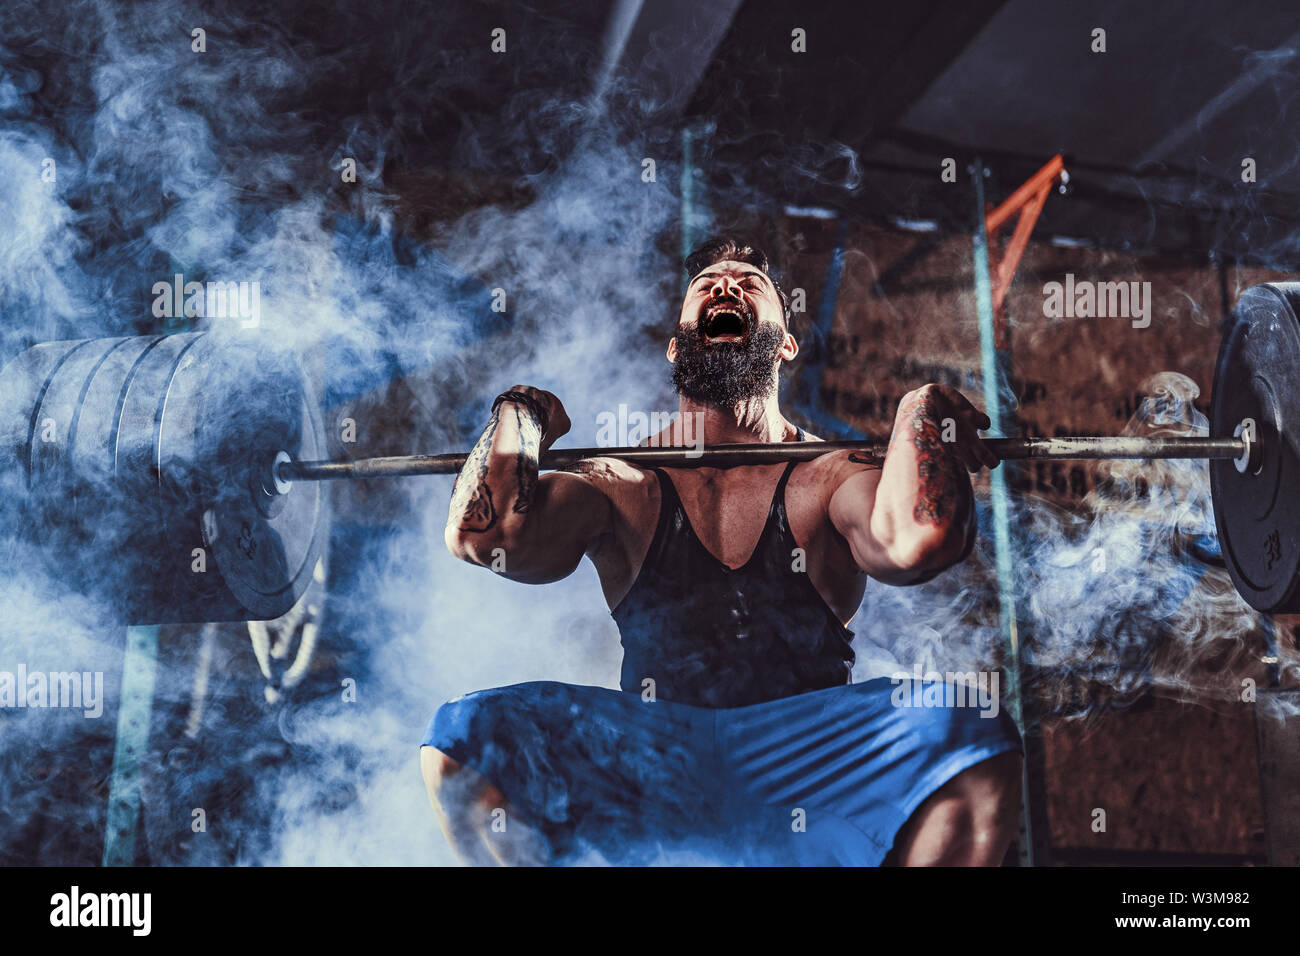 Muscular bearded tattoed fitness man doing deadlift a barbell over his head in modern fitness center. Functional training. Snatch exercise Stock Photo